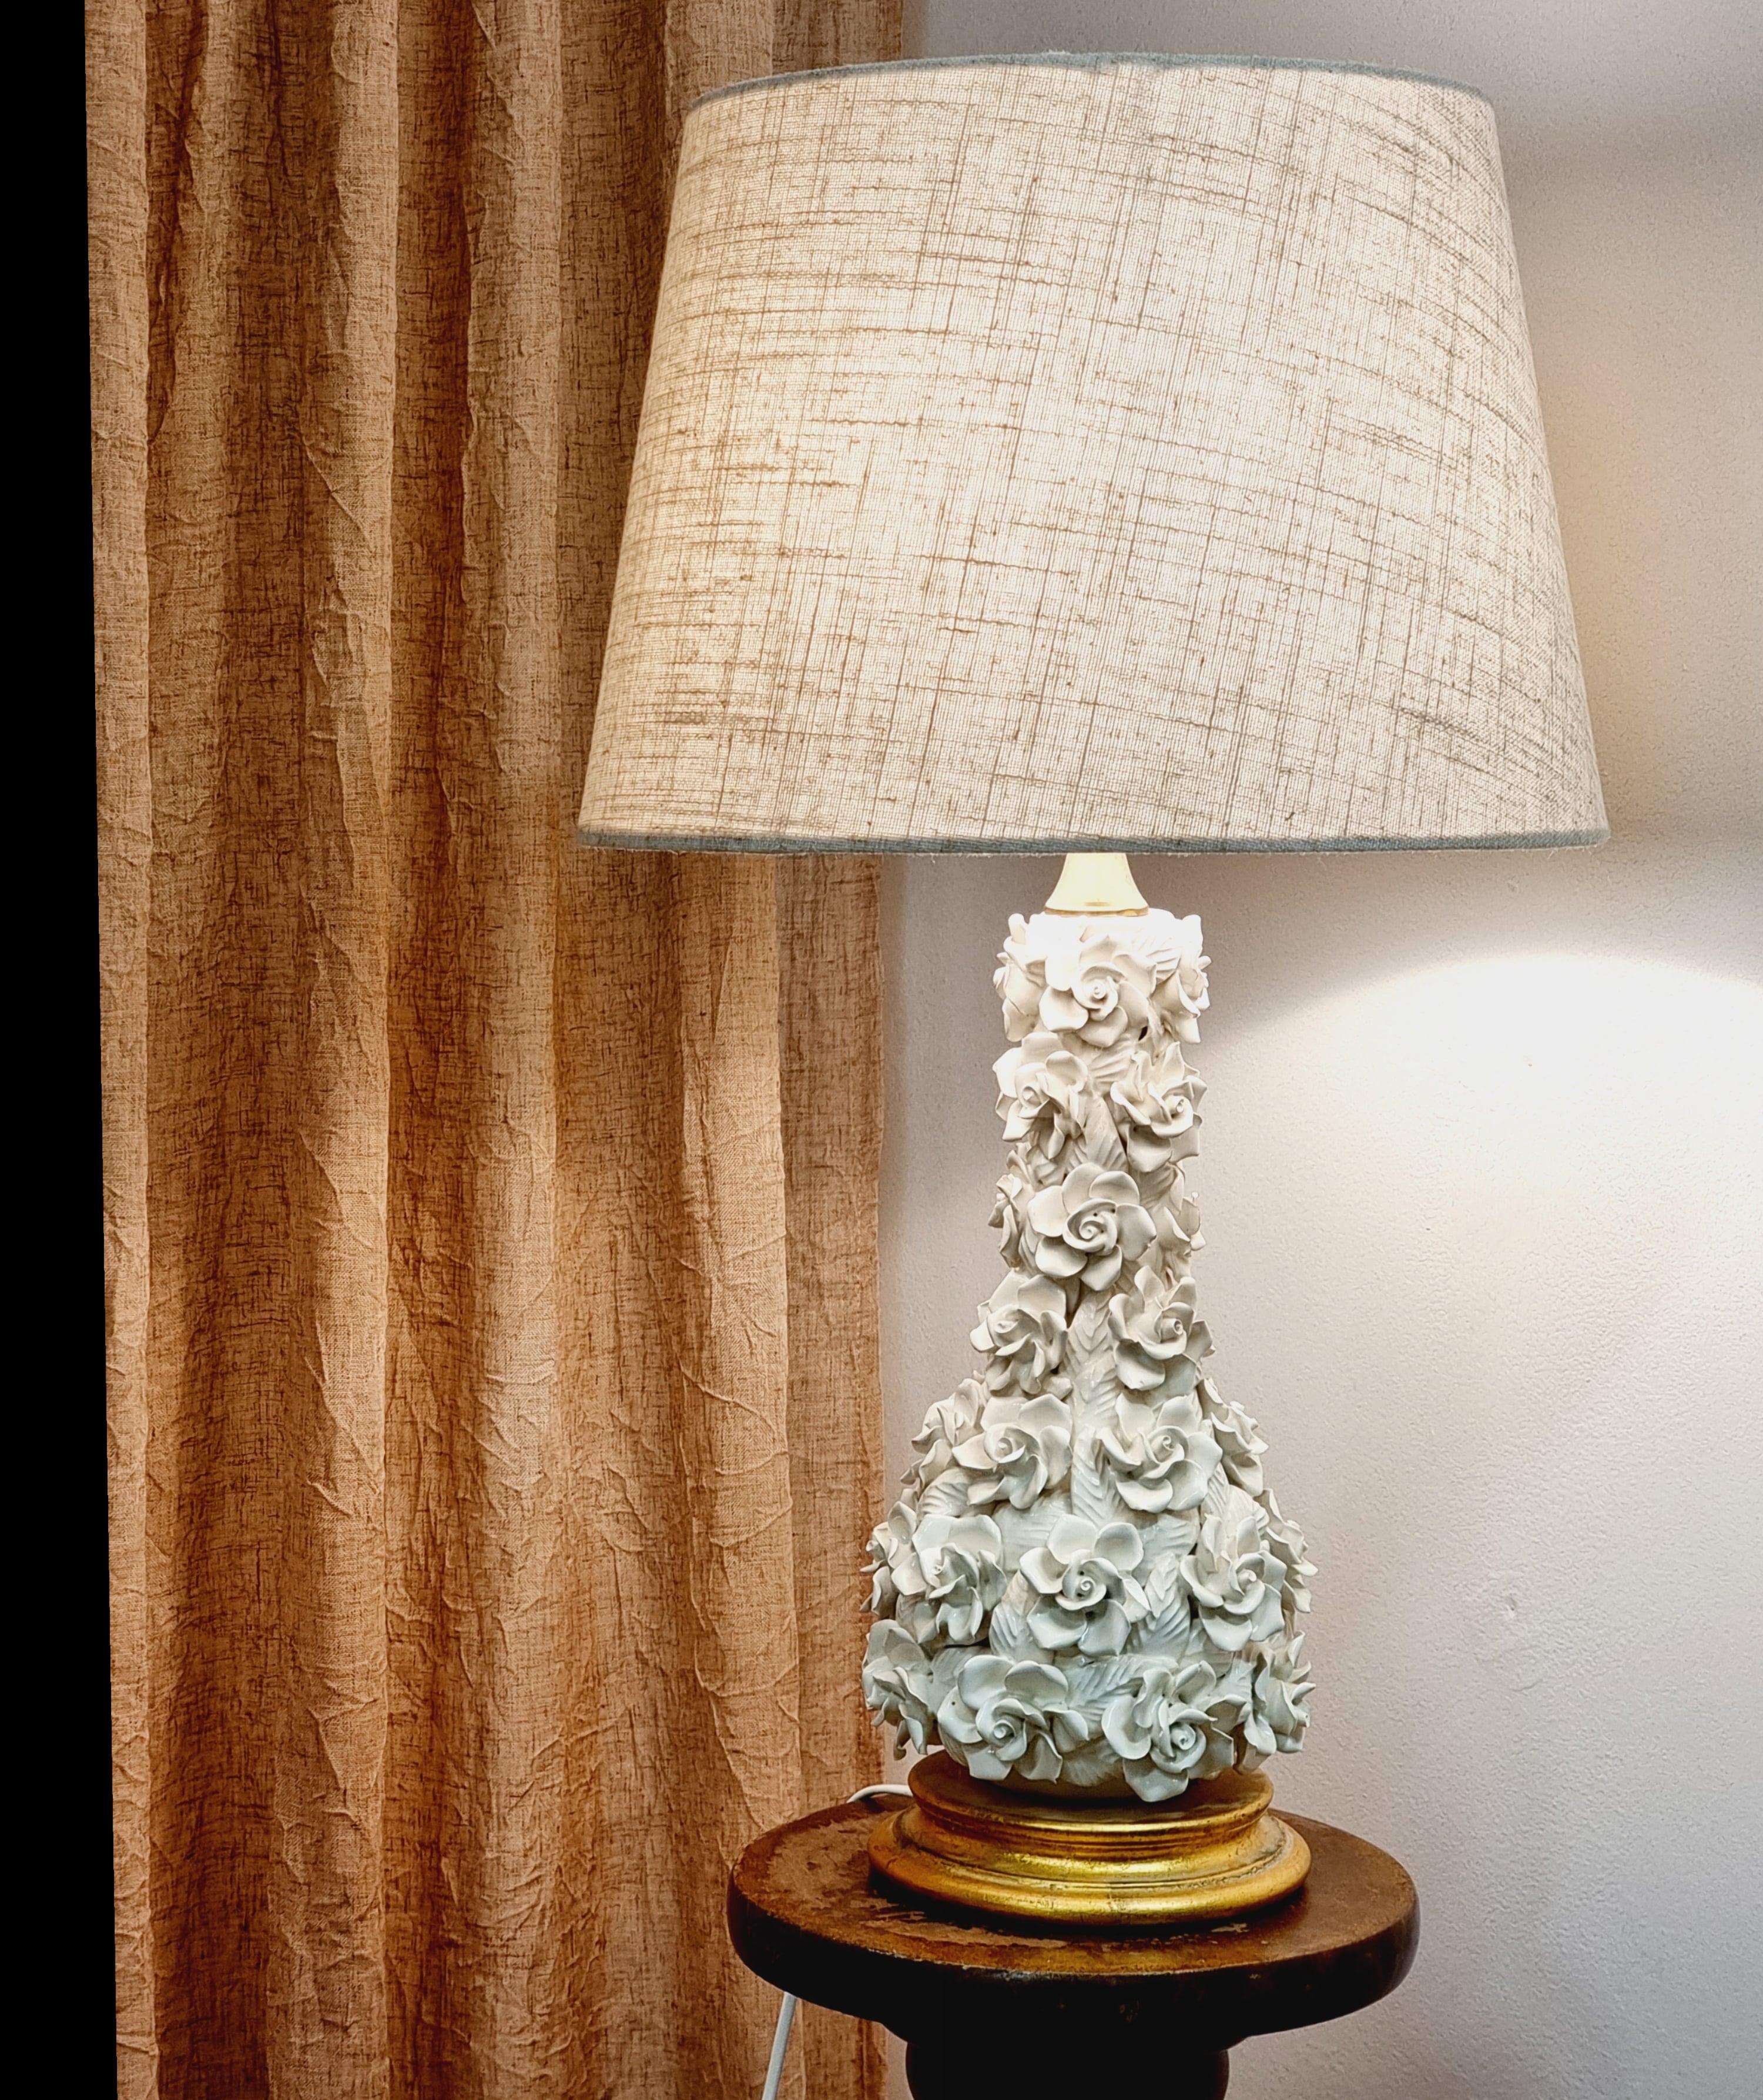 A decorative handmade ceramic table lamp with rose decor. Gold colored wooden base. Baluster shape and brass detail at the top. Beautiful and sculptural. 

In good condition, a few chips, normal signs of age and wear. 

   